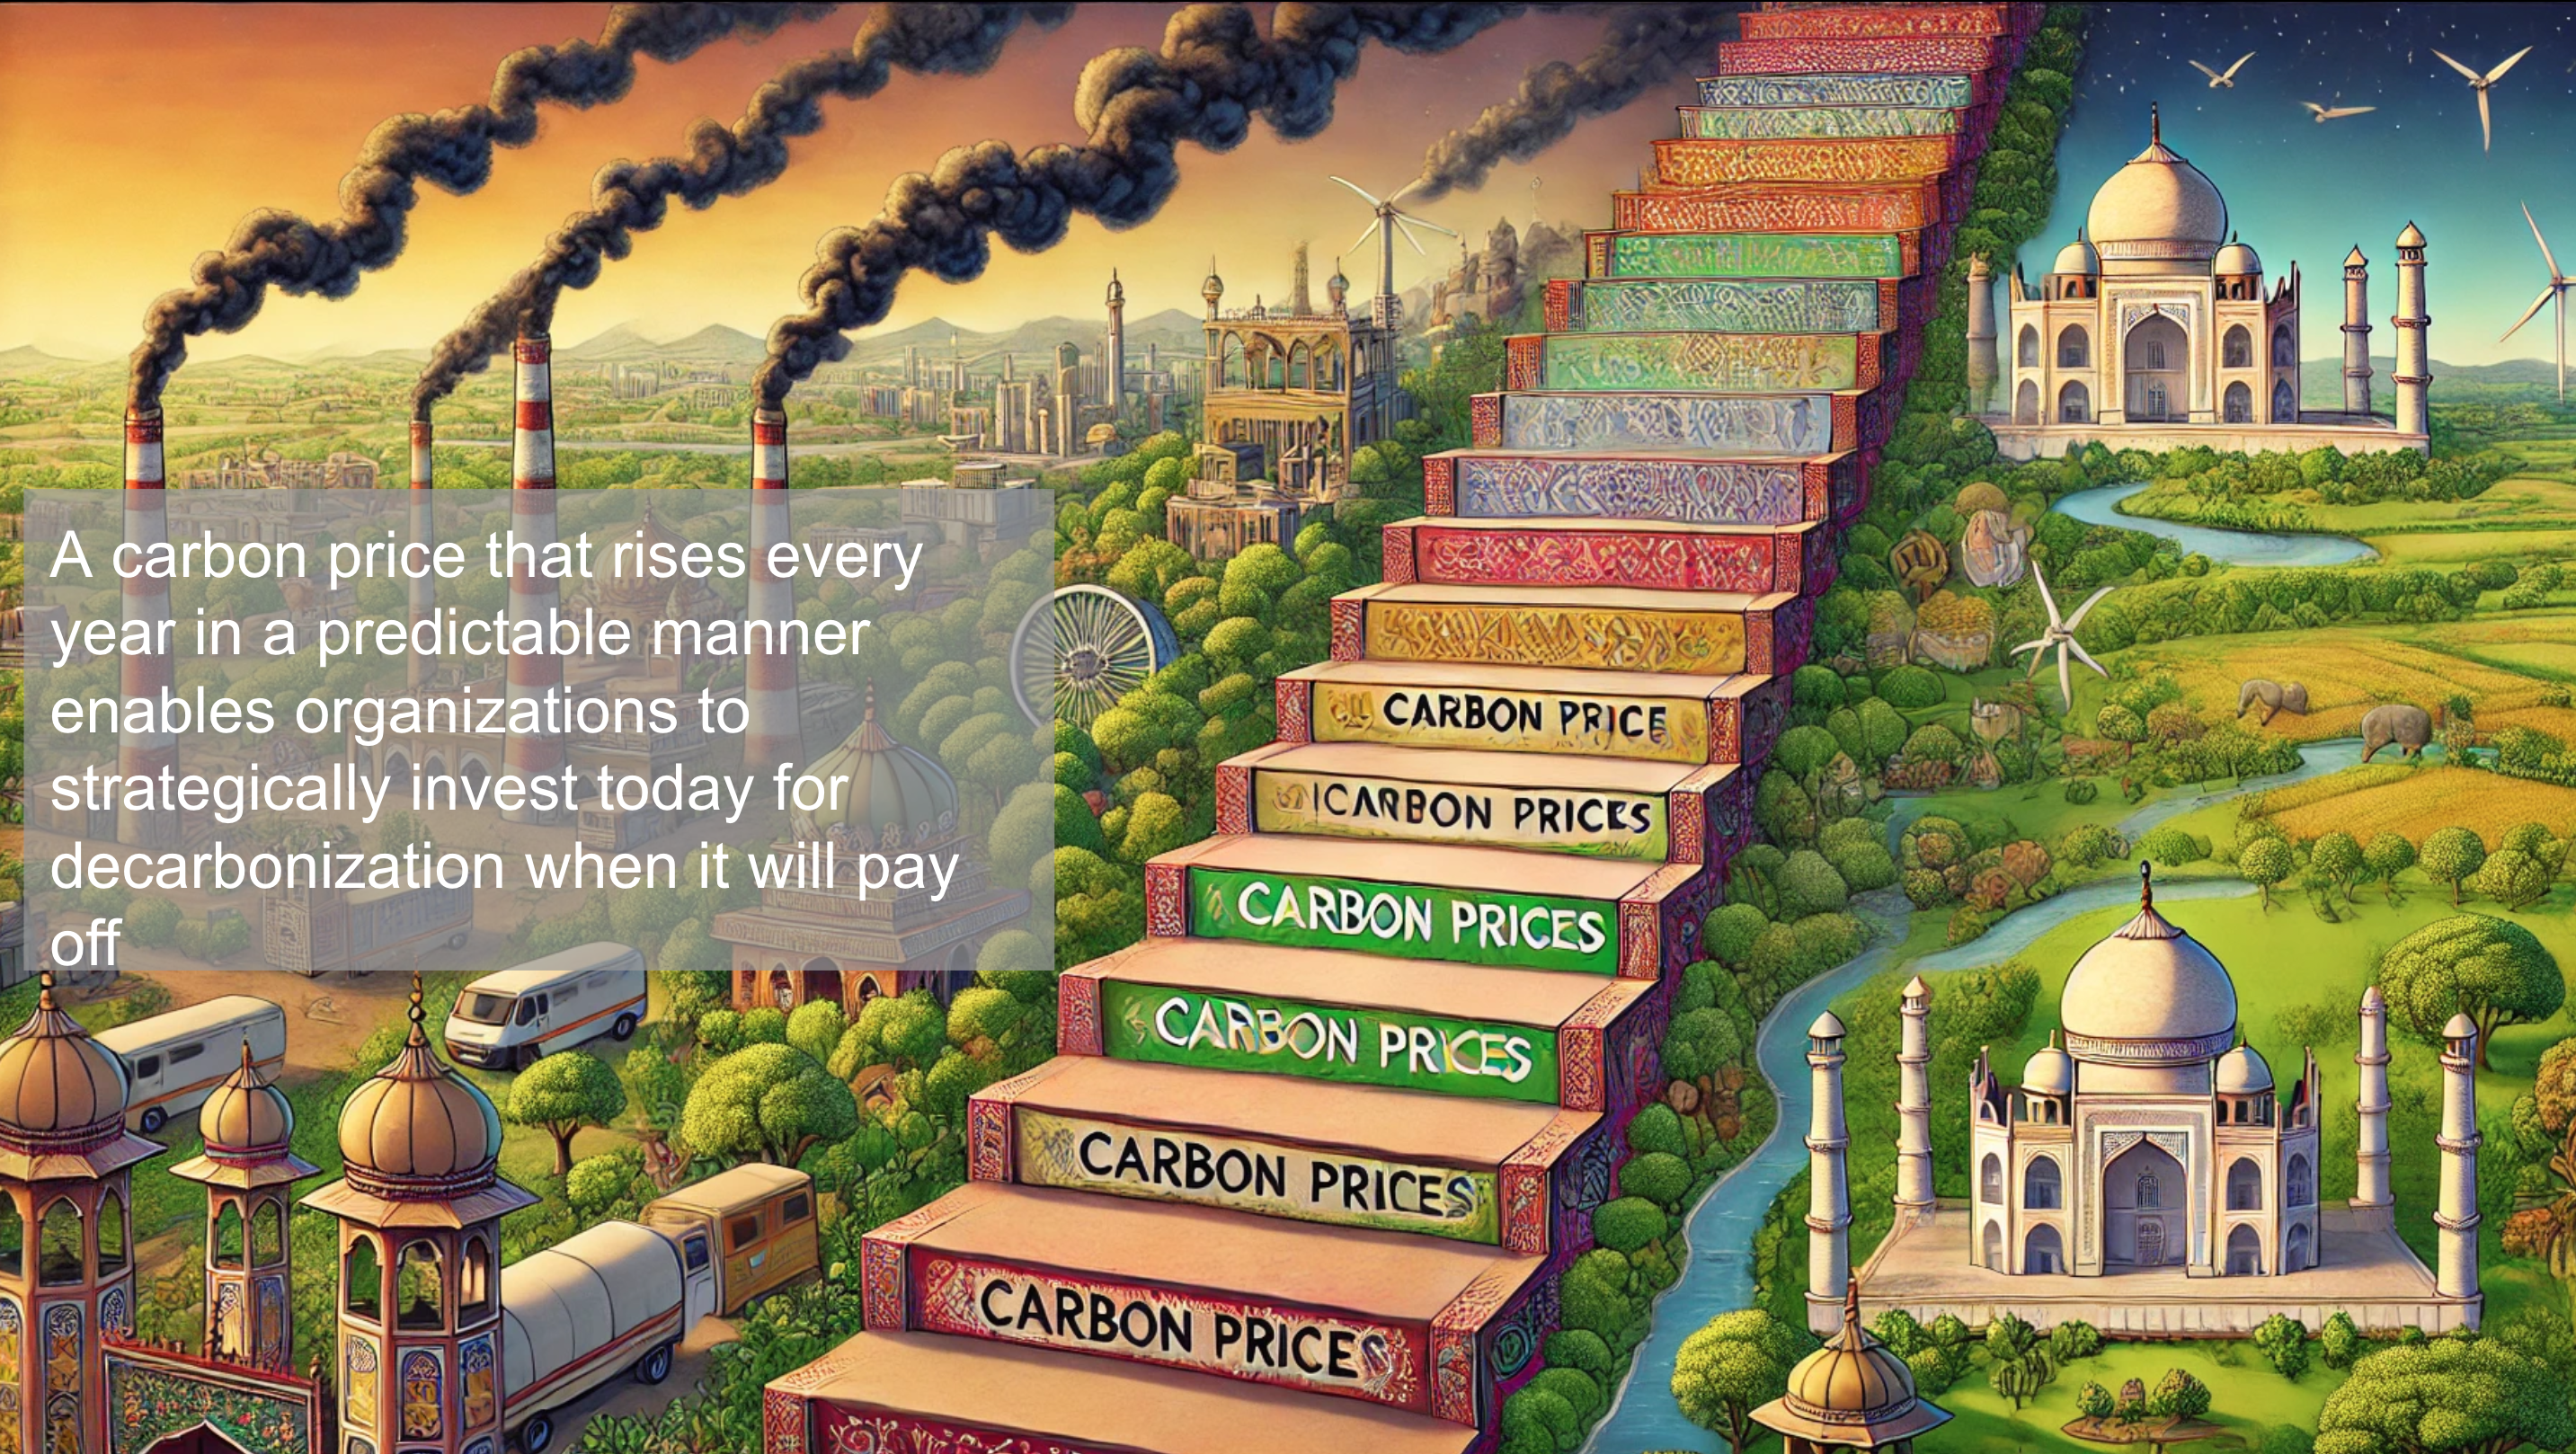 Slide from Indian utilities seminar on carbon pricing by Michael Barnard, Chief Strategist, TFIE Strategy